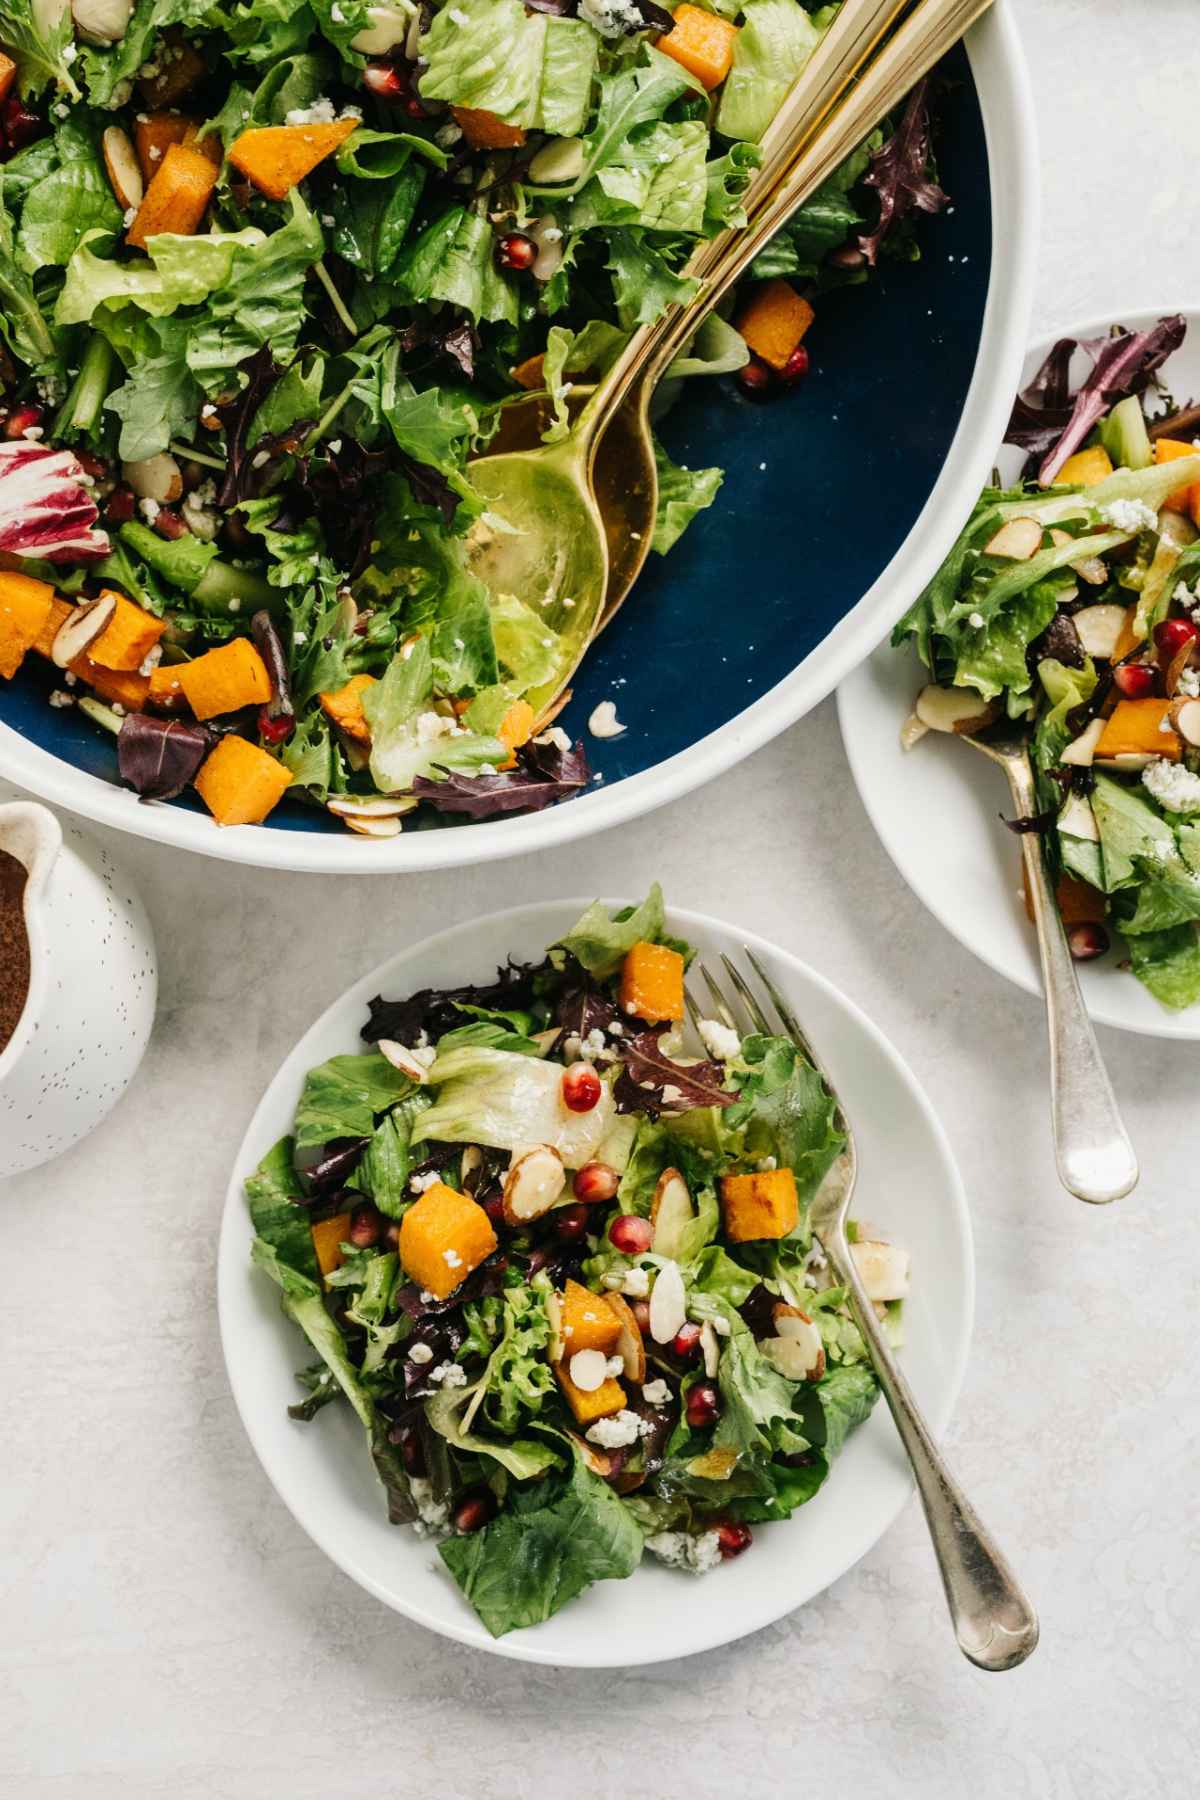 Salad topped with butternut squash, cheese and almonds.